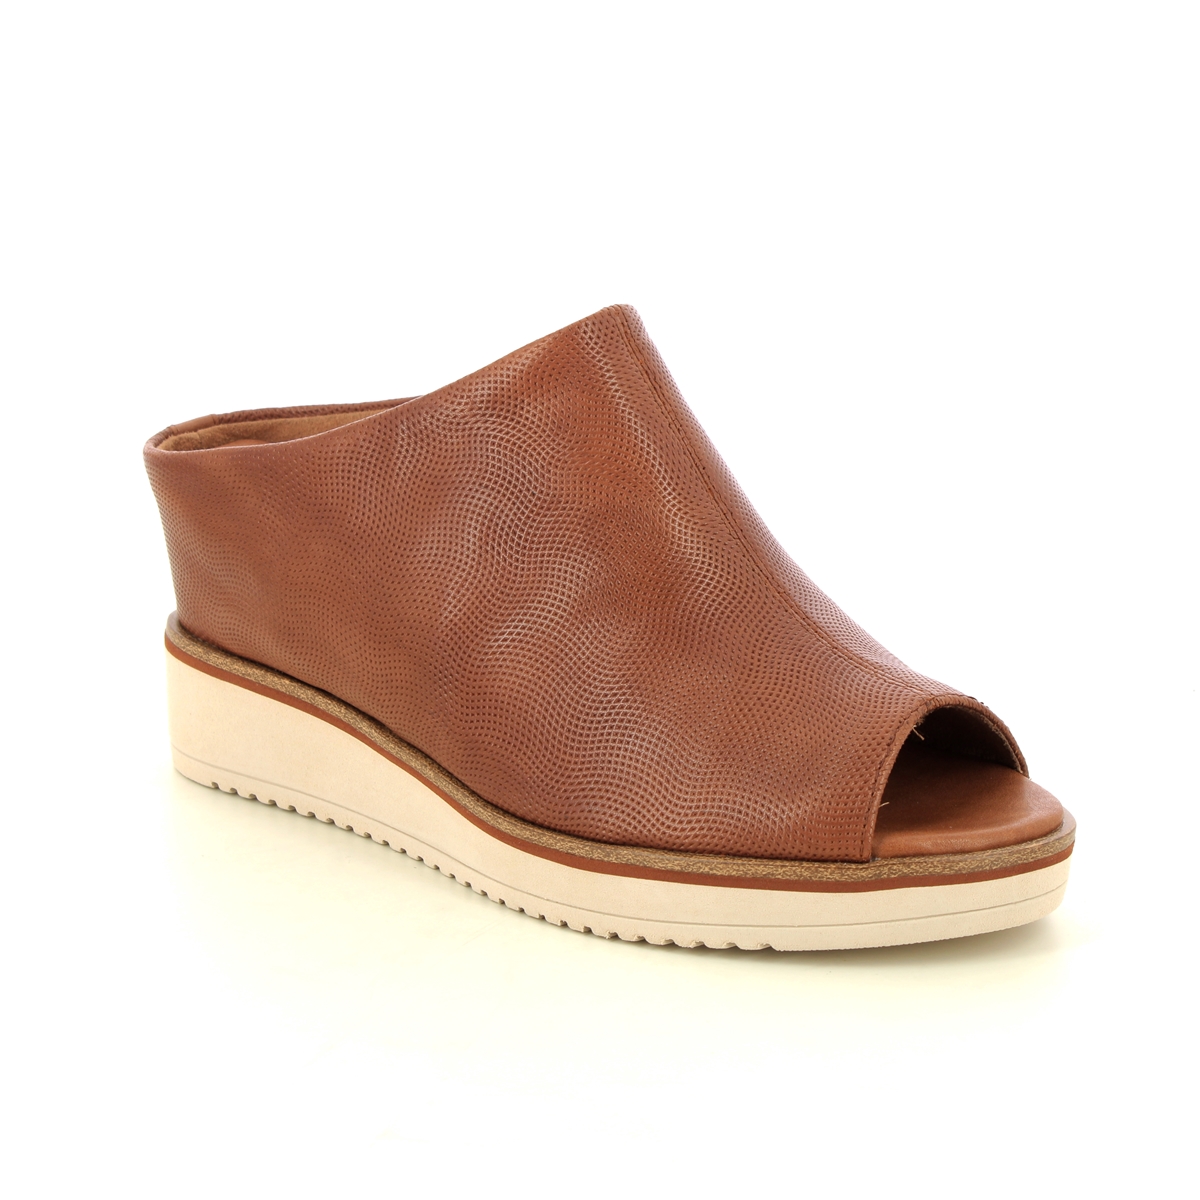 Tamaris Alis Slide Tan Leather Womens Wedge Sandals 27200-42-372 in a Plain Leather in Size 40